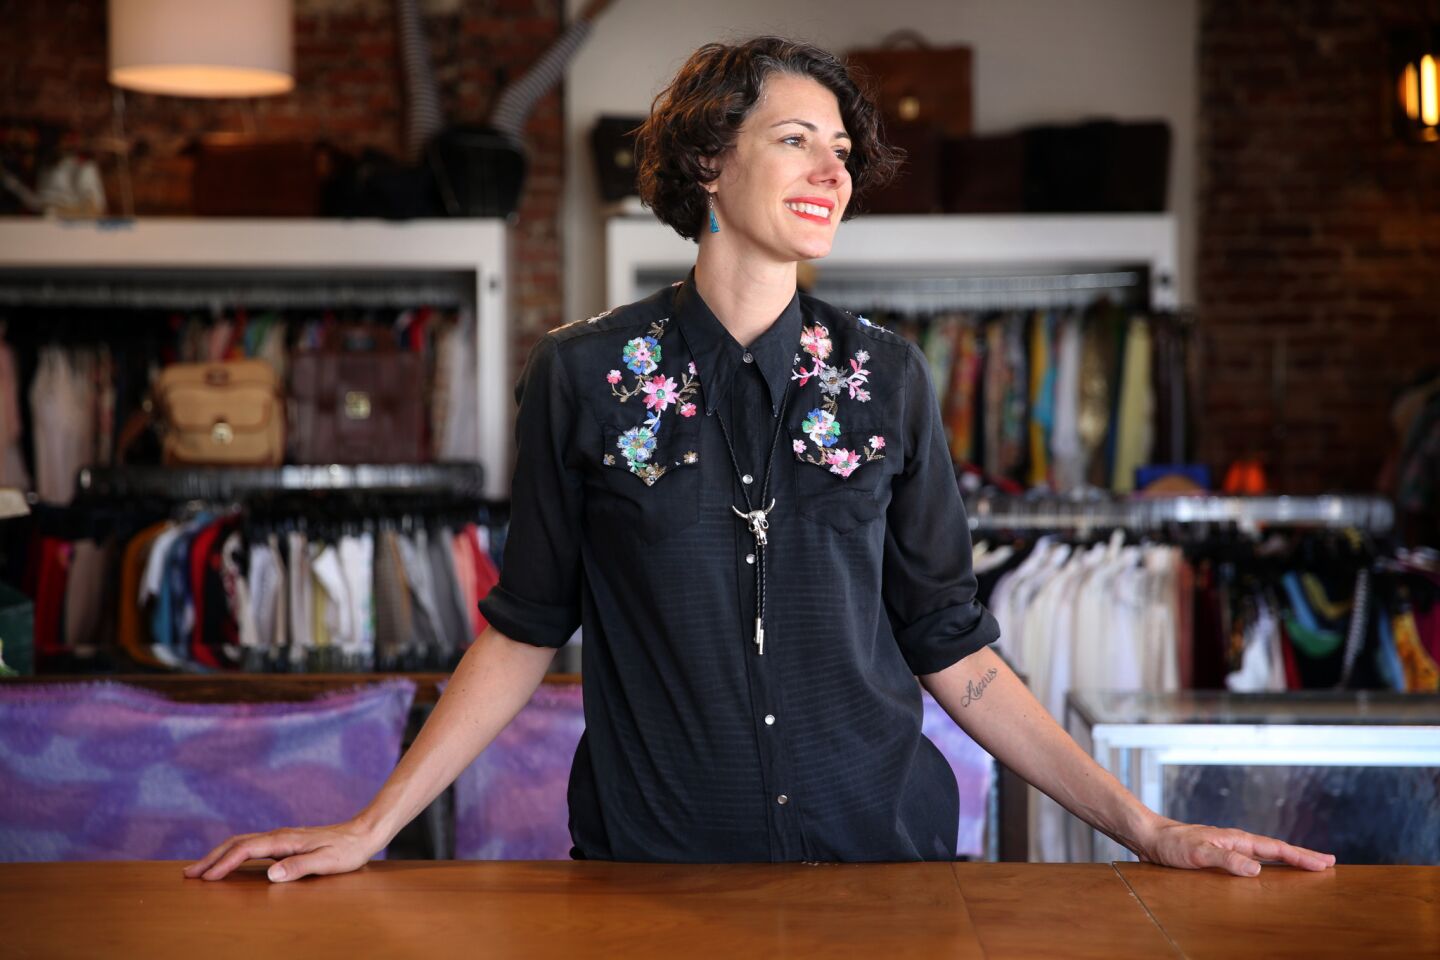 Johanna Moynahan, owner of Far Outfit, which specializes in midcentury vintage clothing, sustainable clothing and eclectic furnishings.